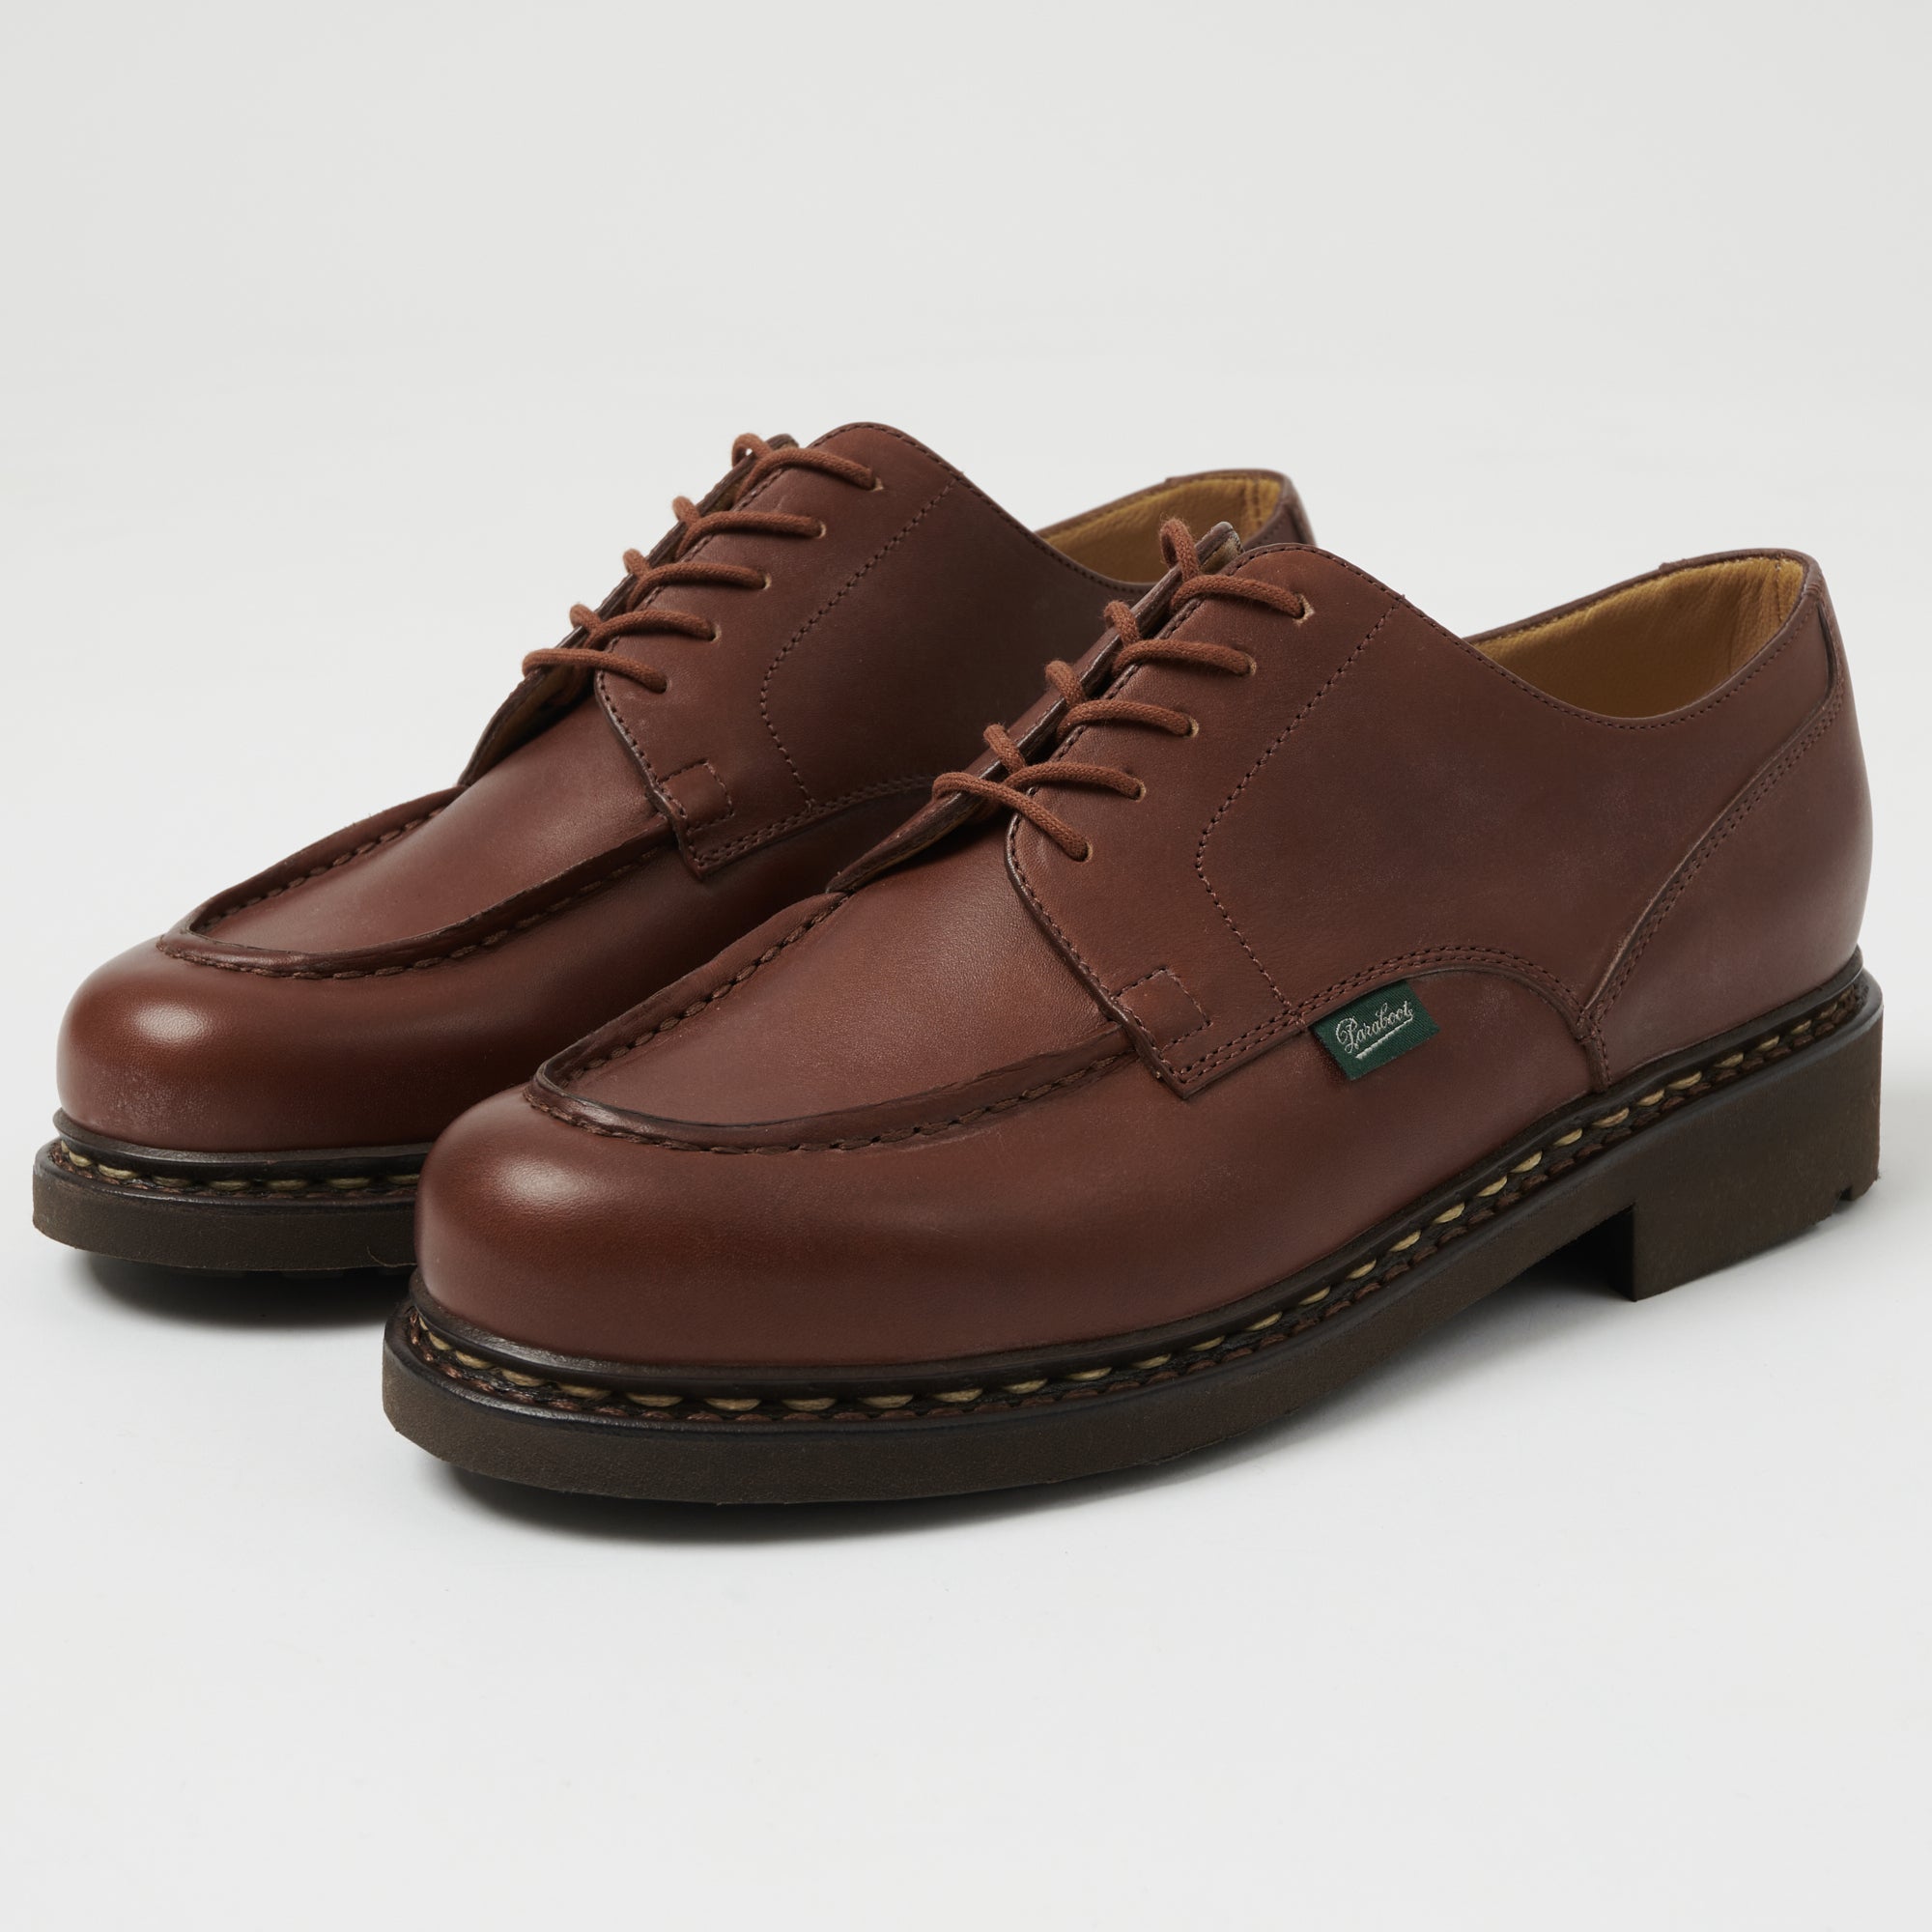 Paraboot Chambord Tex Shoe - Brown Lisse Marron | Son of a Stag